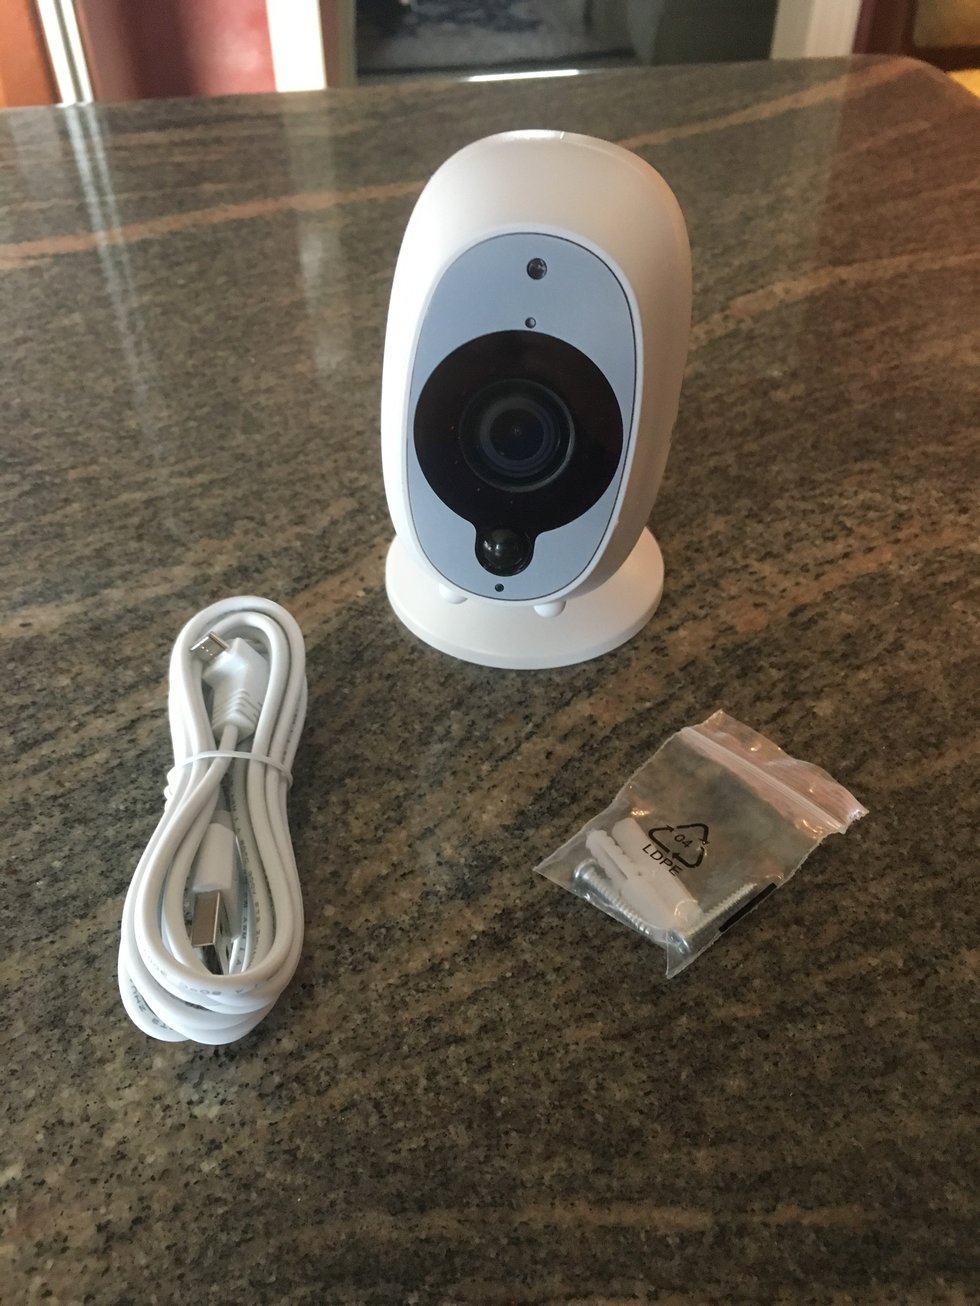 Swann Security Camera with charging cable and mounting screws.